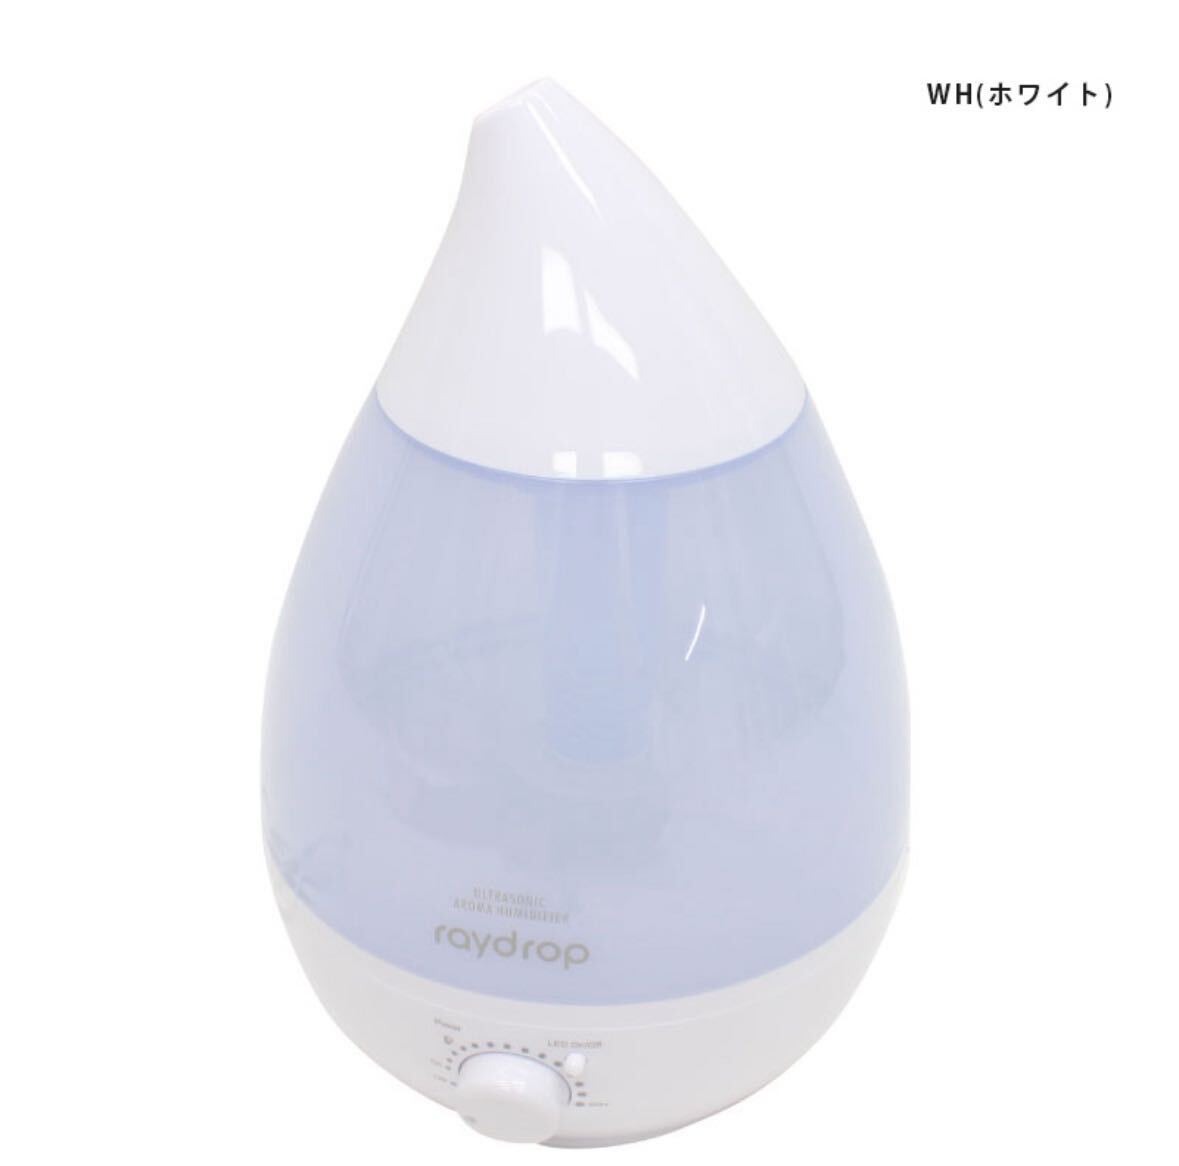  unused ultrasound humidifier ultrasound aroma LED humidifier Ray Drop 3.8L KH-309 tanker 3.8L LED attaching anti-bacterial cartridge attaching ... type desk 6040918